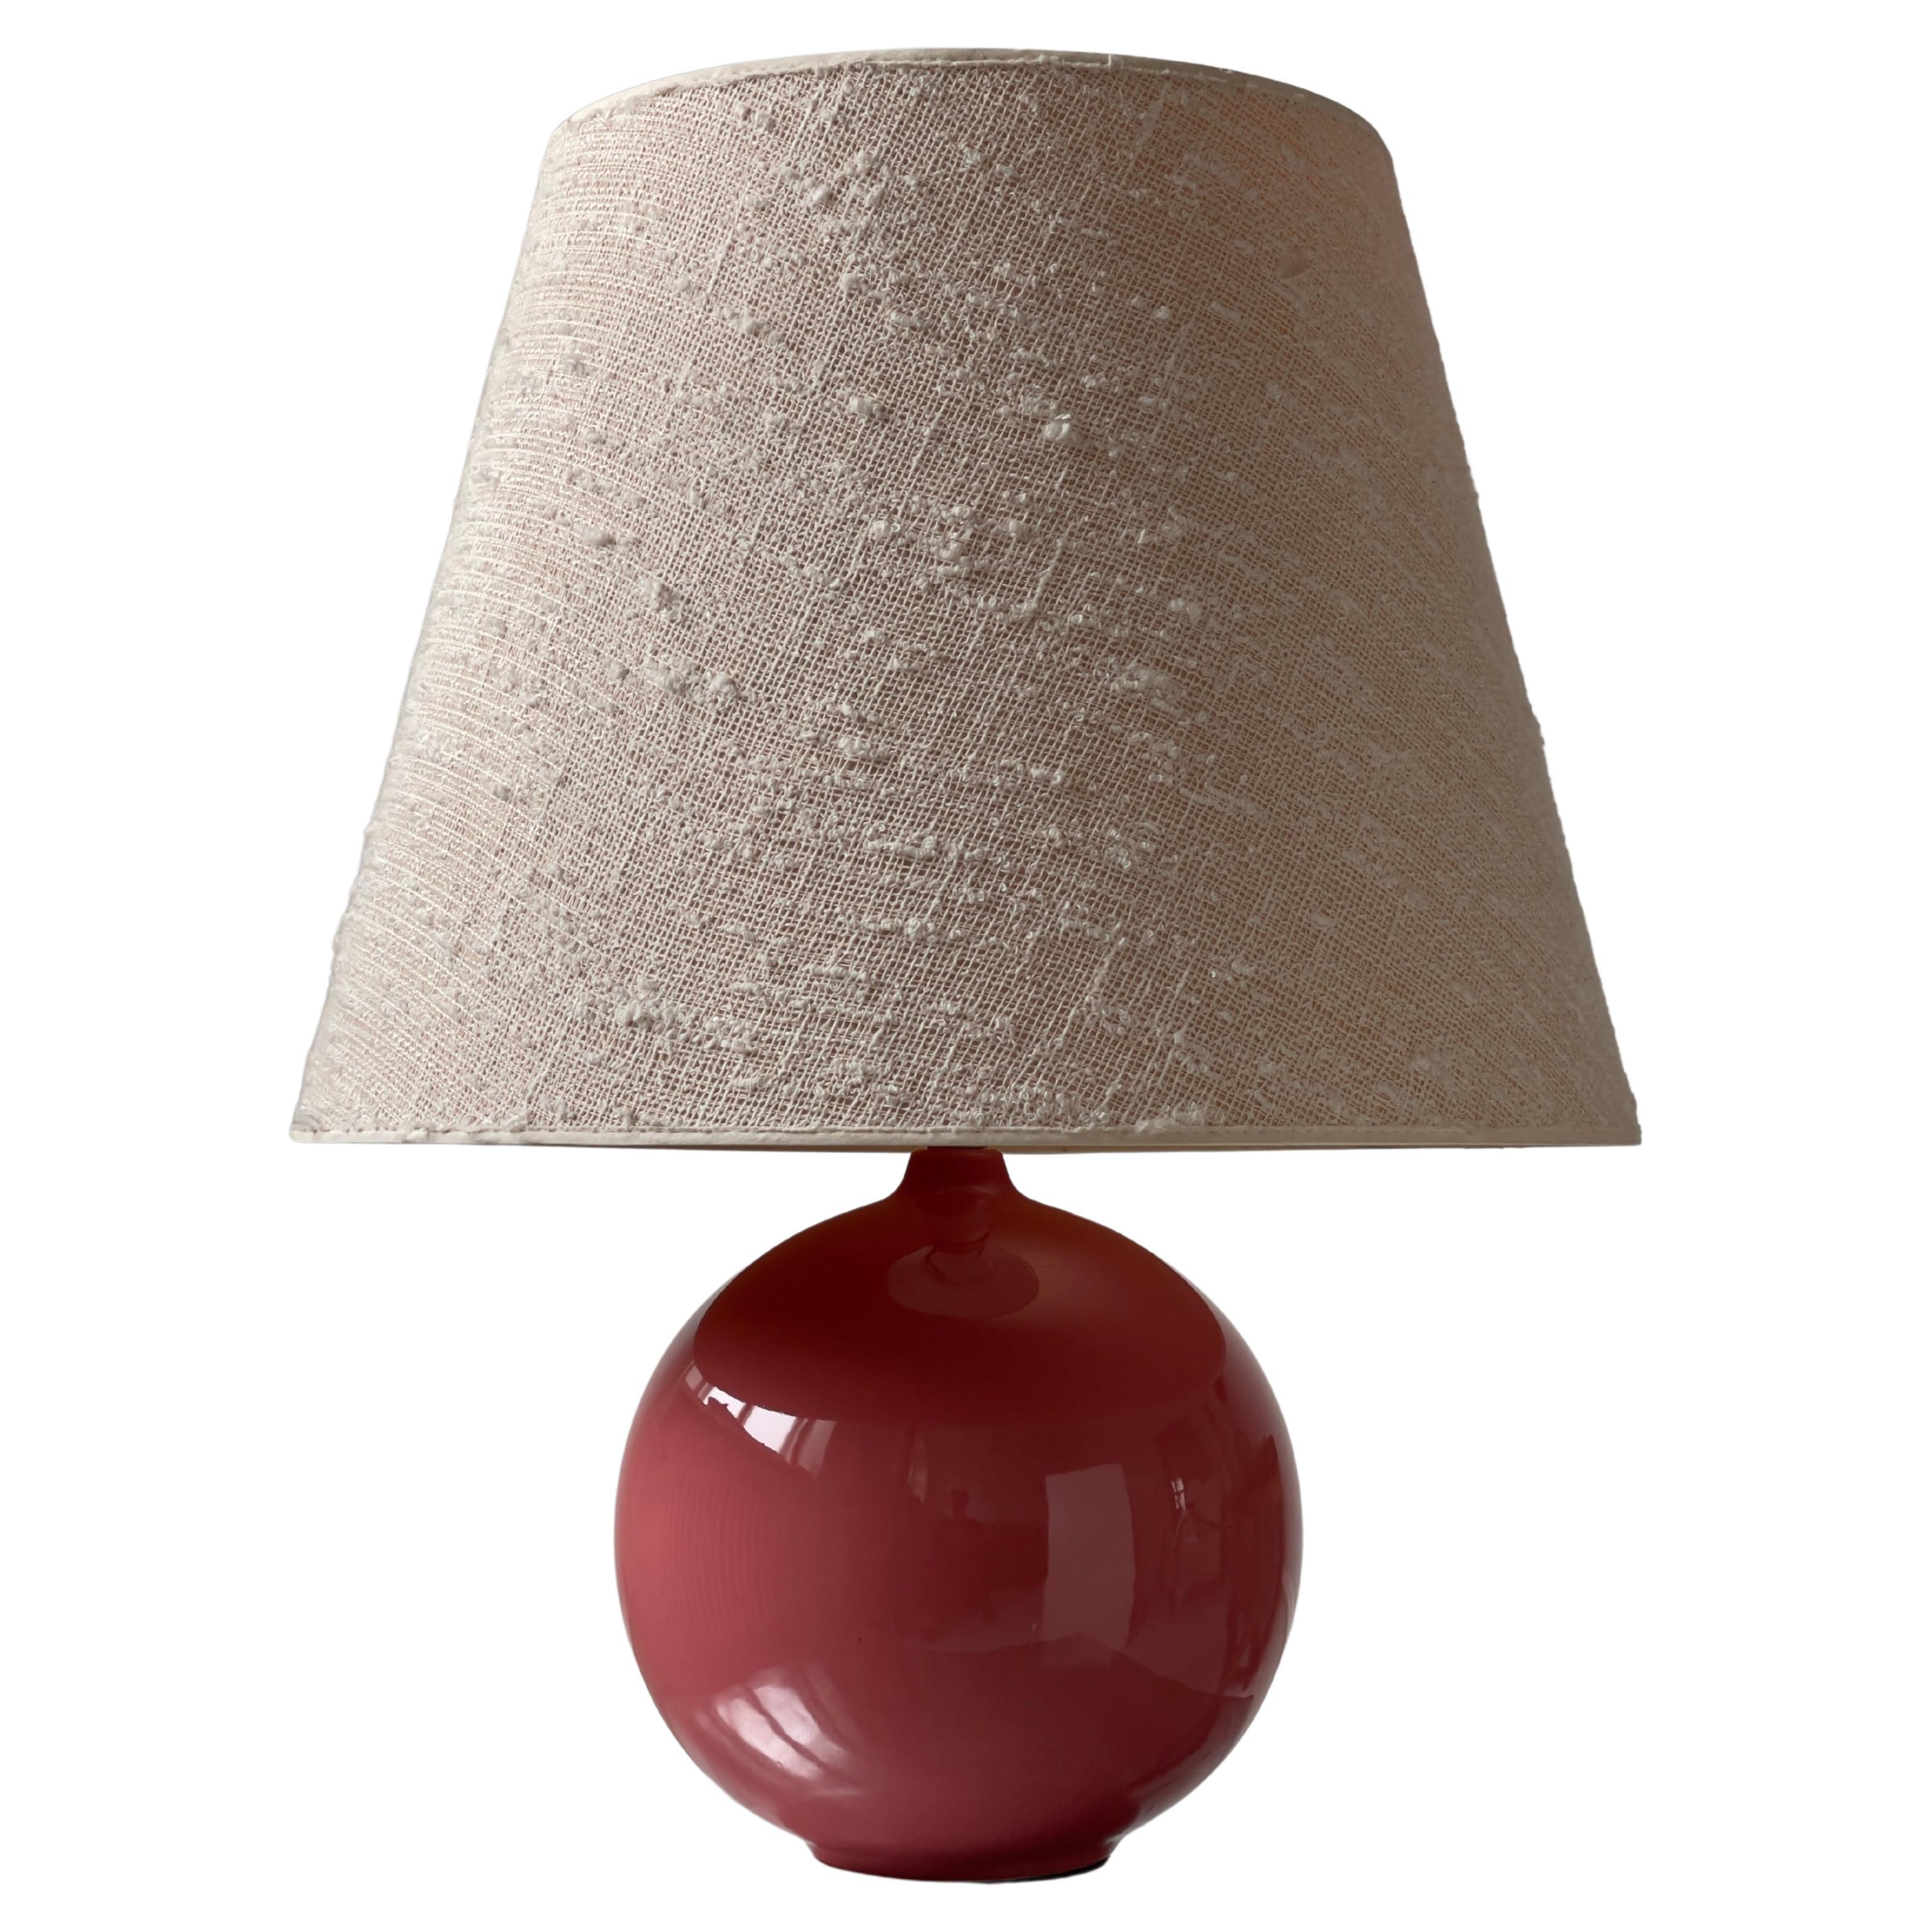 Large Round French Ceramic Table Lamp in in Rose Red Glaze